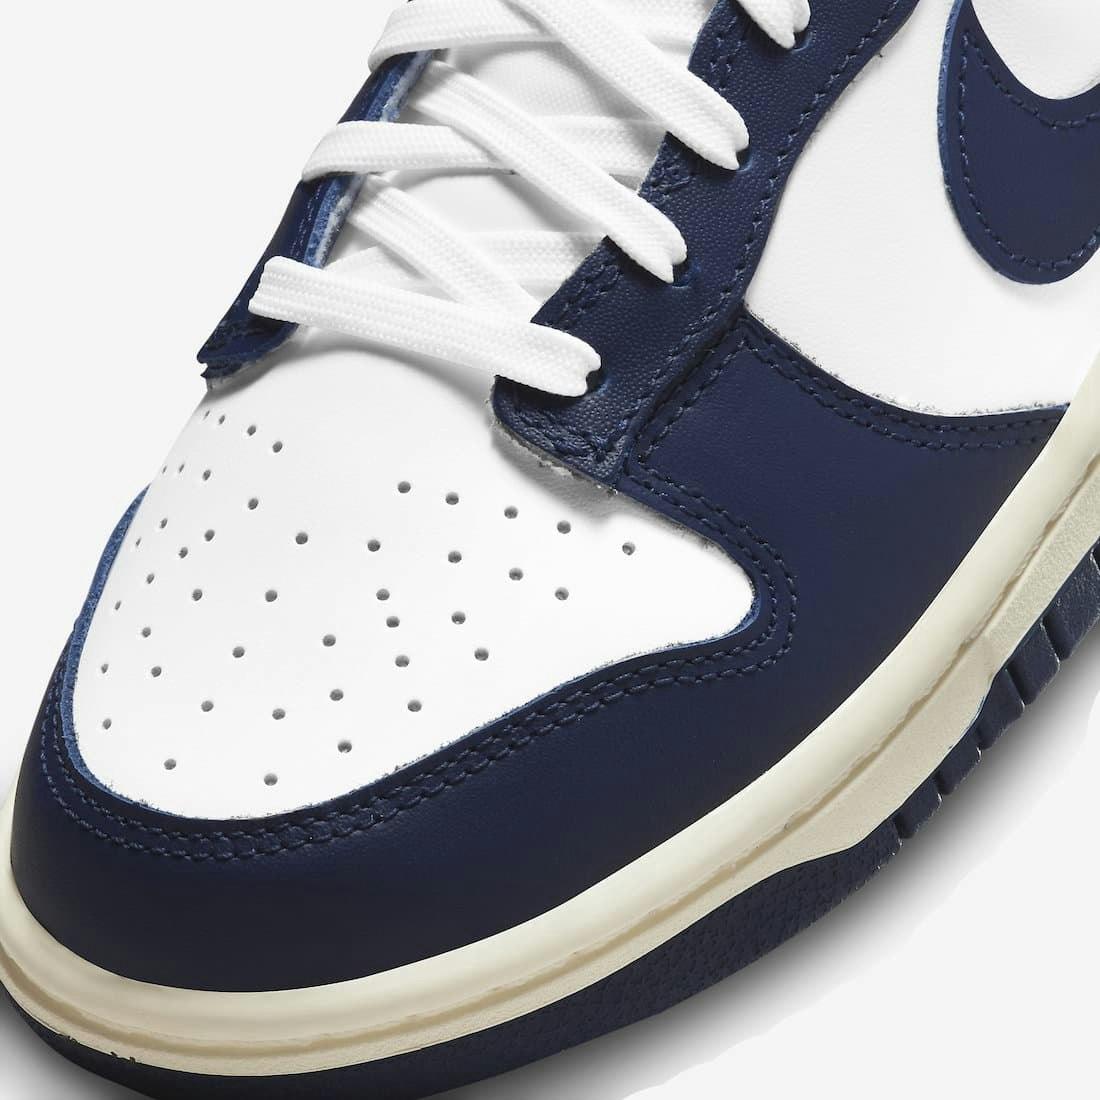 Nike Dunk Low "Aged Navy"